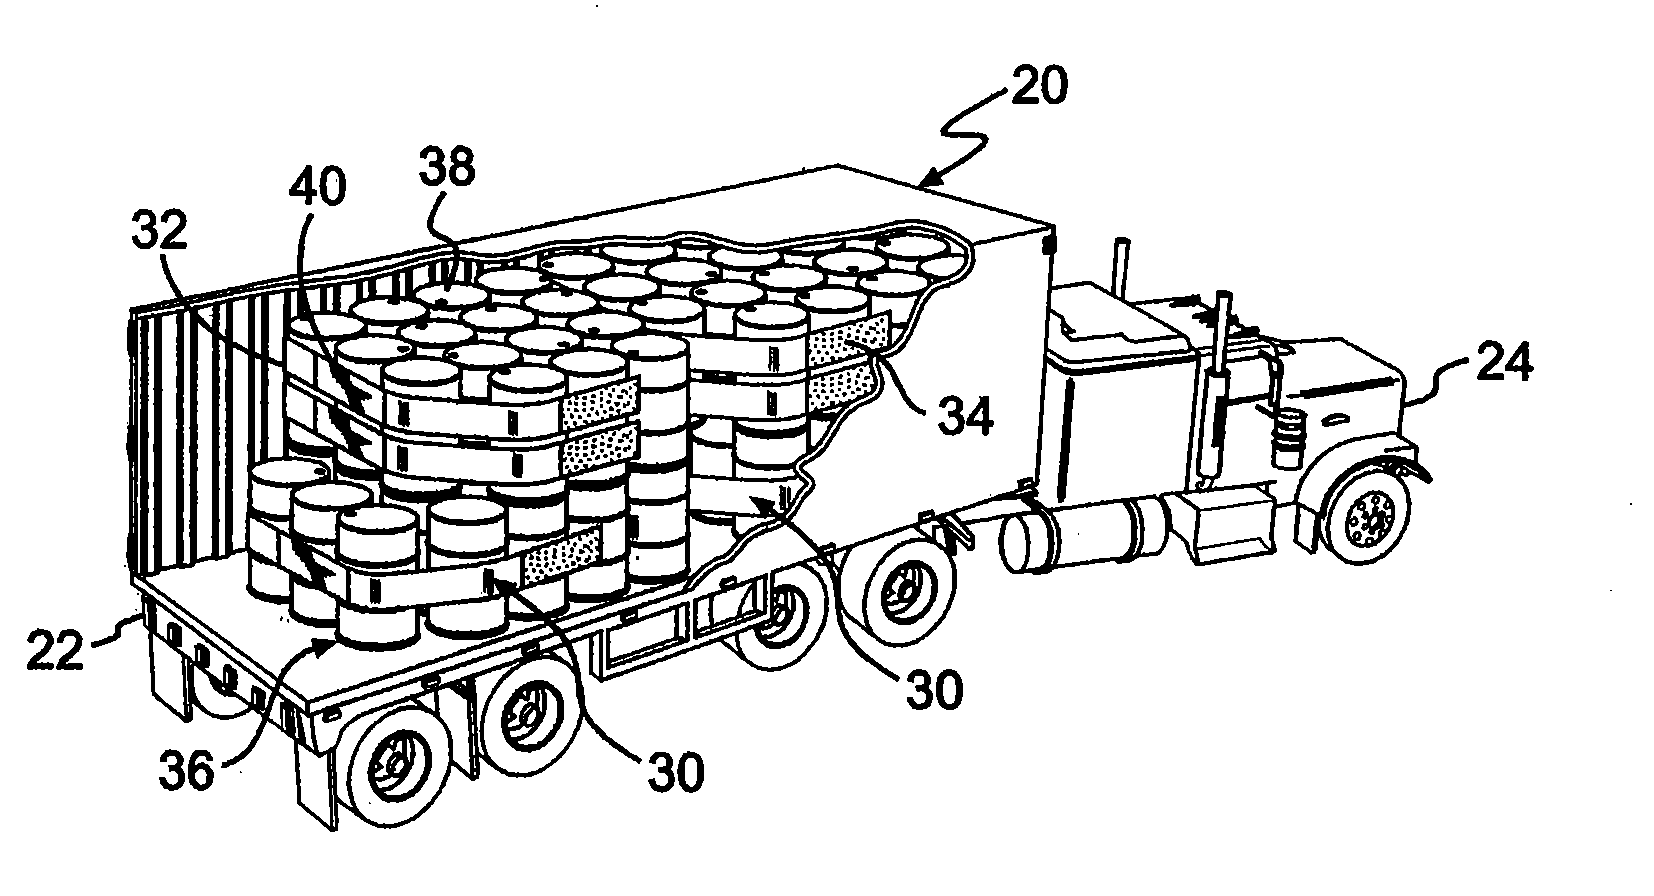 Cross-weave cargo restraint system and method